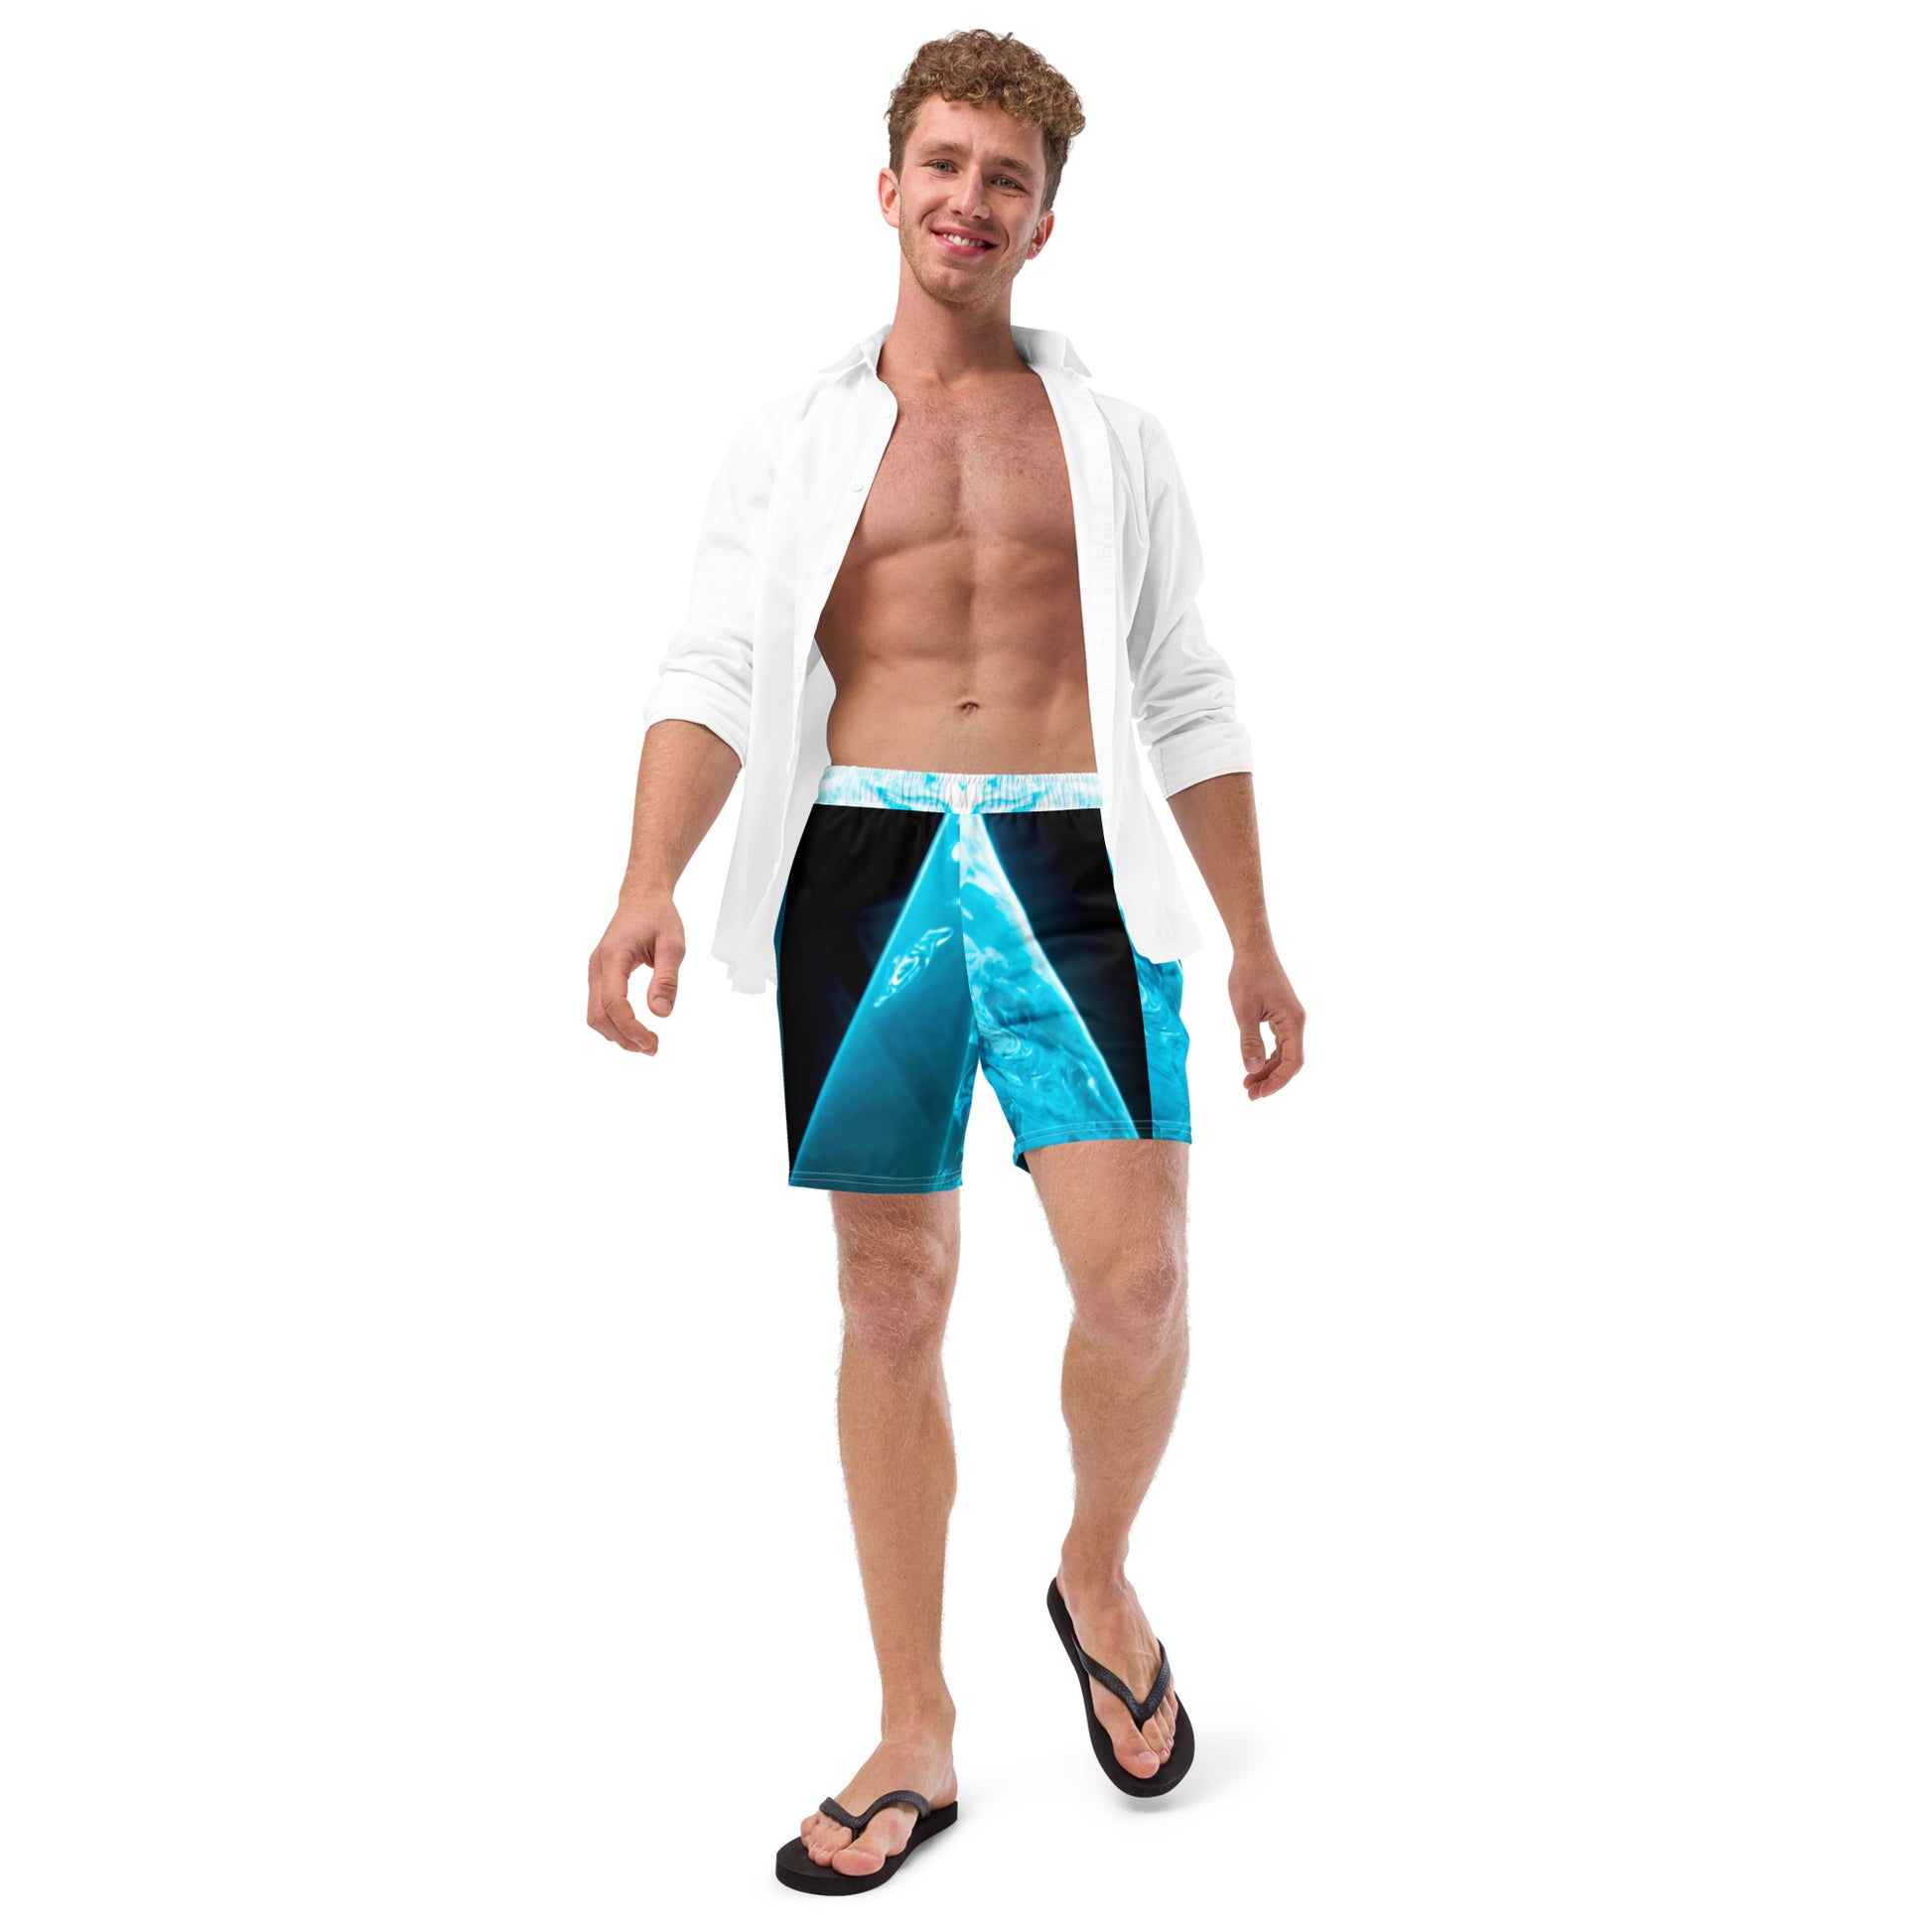 Men's Aqua Spotlight Swim Trunks will give you just the experience you need to see yourself in the spotlight and look good while doing so!